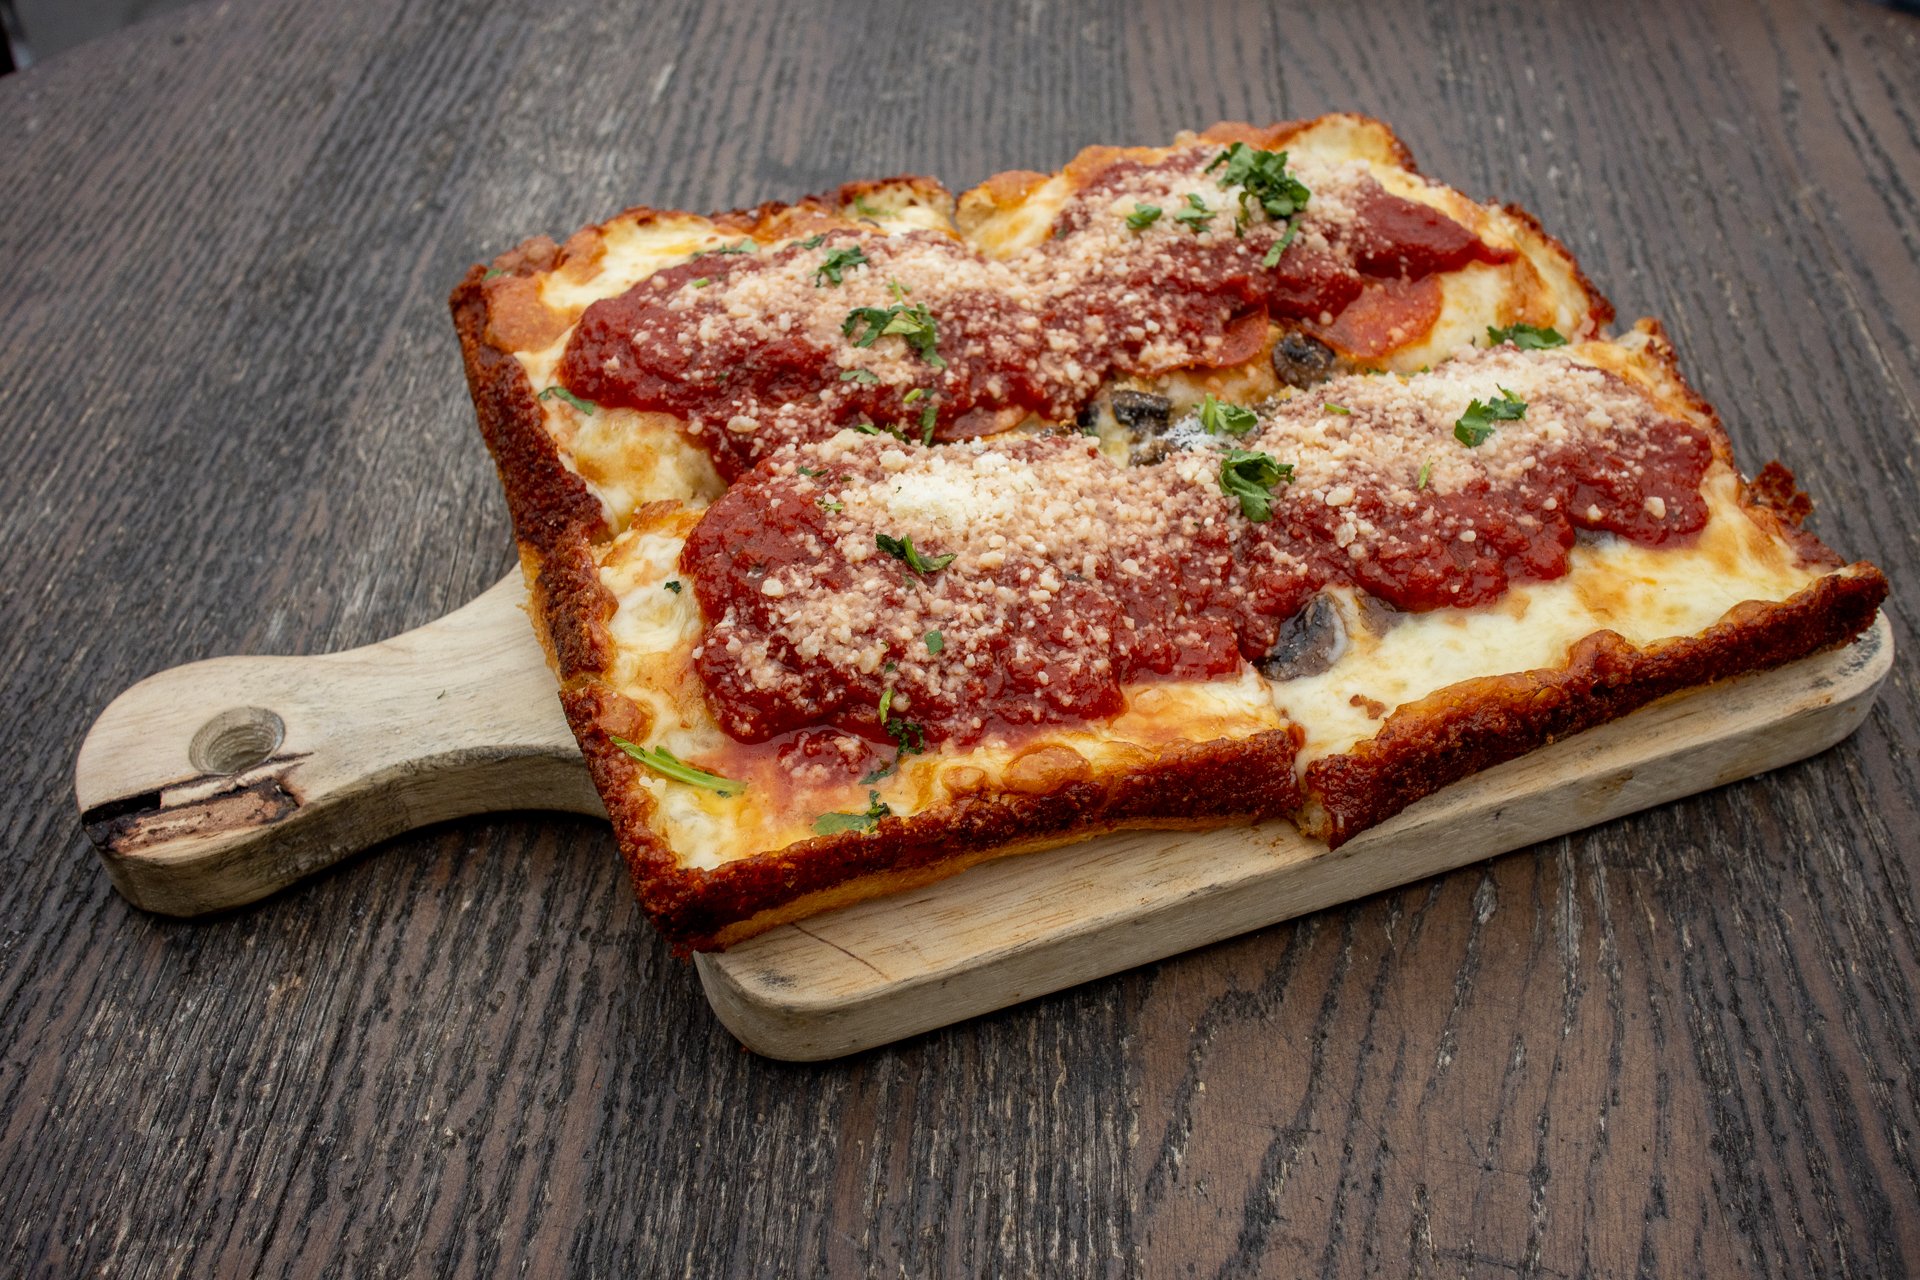 What Makes Detroit-Style Pizza Great? It's All About the Pan